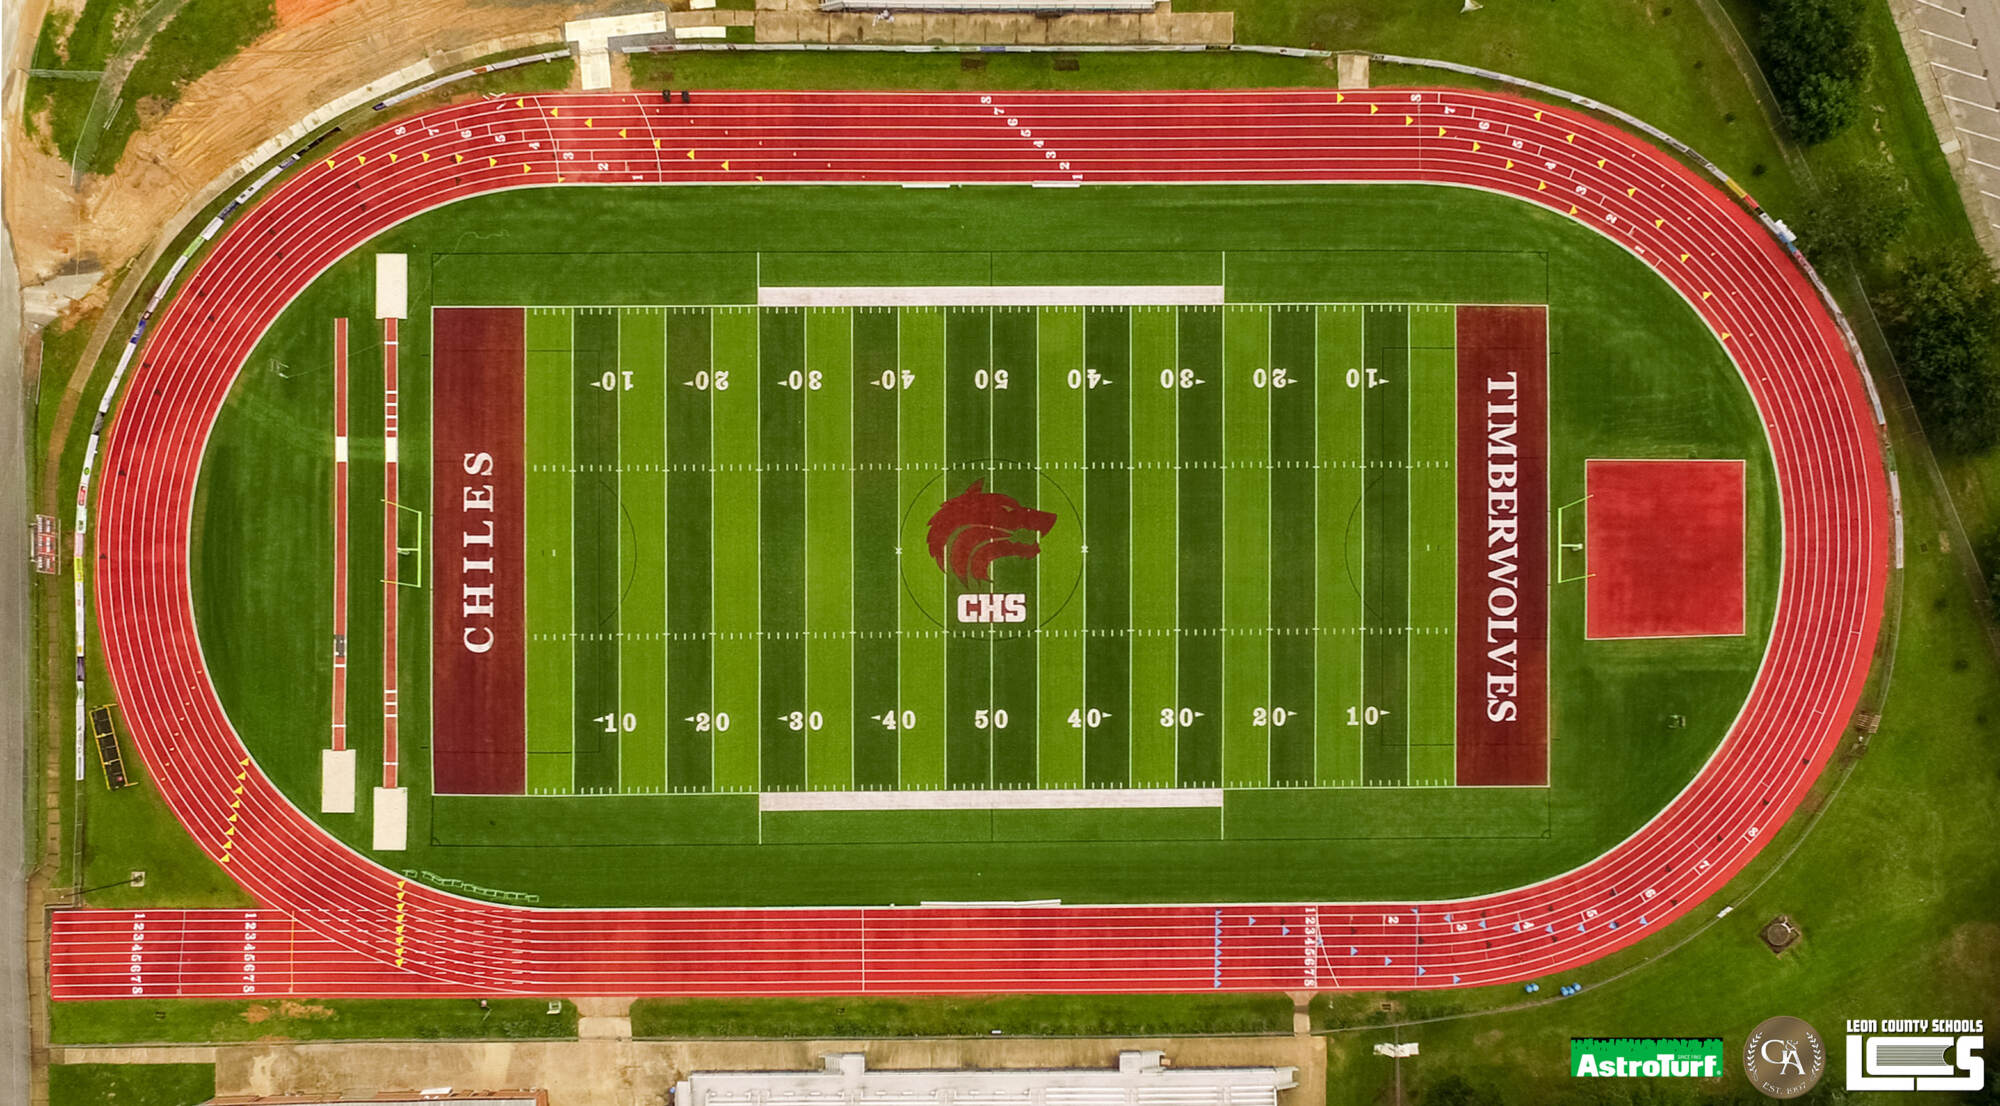 New AstroTurf at Chiles High School